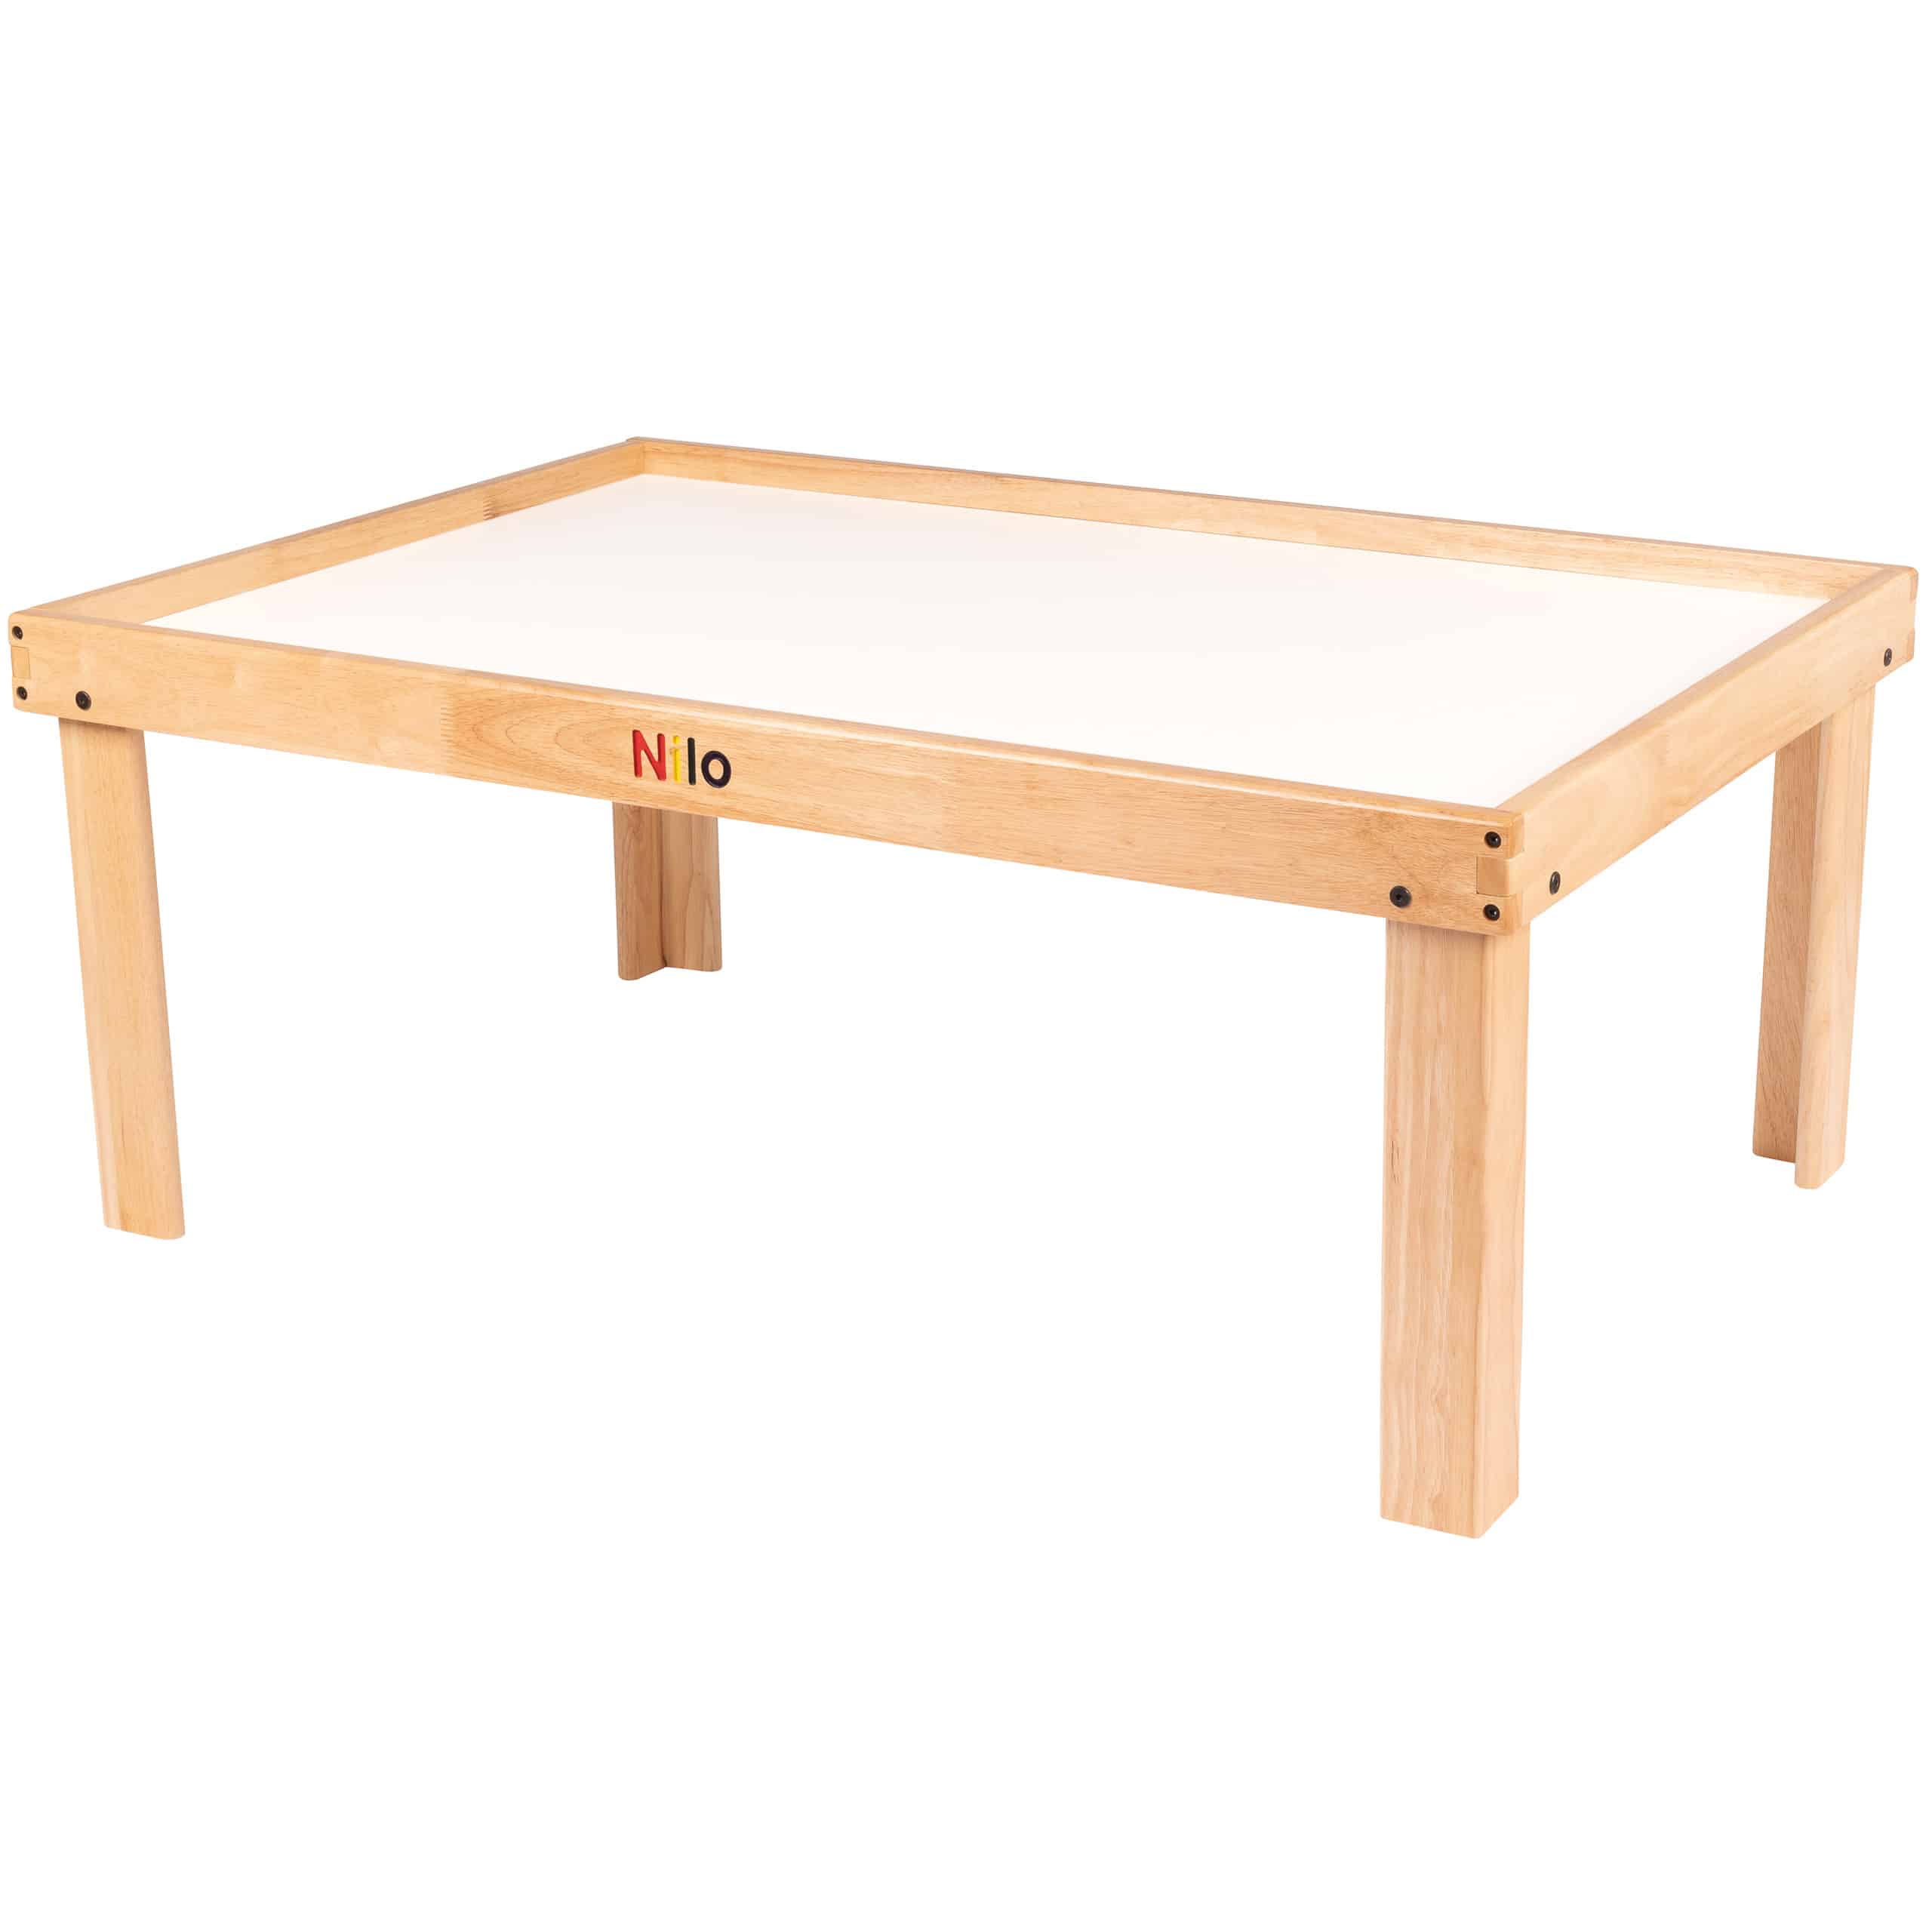 https://www.nilotoys.com/wp-content/uploads/2016/08/large-play-table-no-hole.jpg